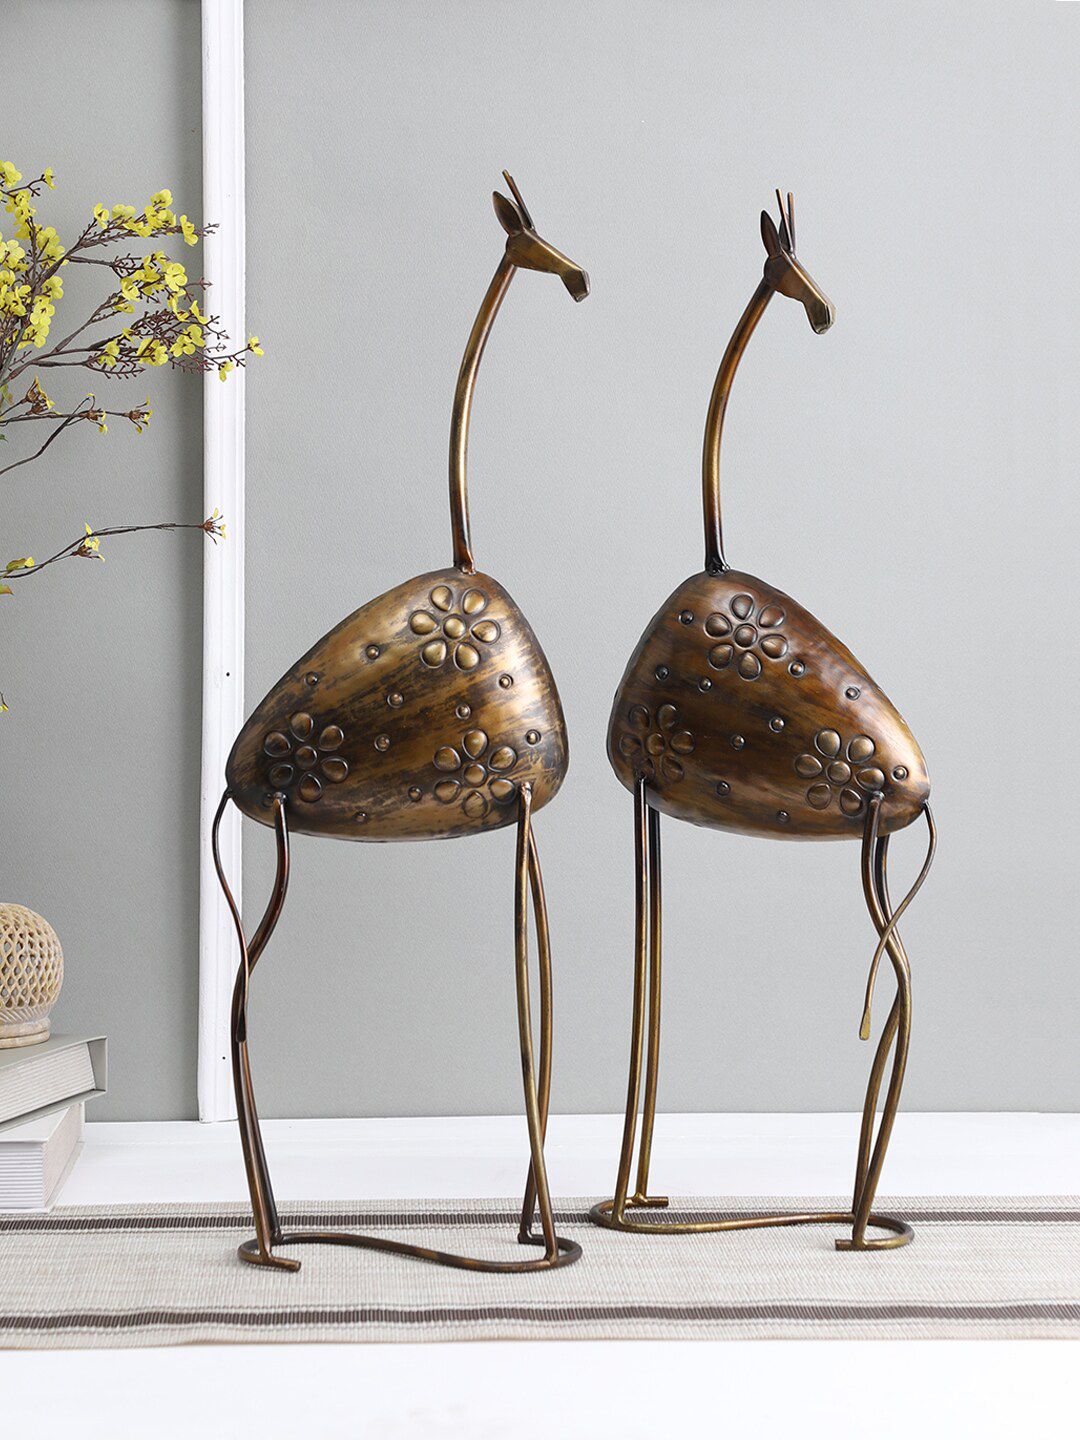 Aapno Rajasthan Set of 2 Brown Rustic and Earthen Baby Giraffe Showpieces Price in India